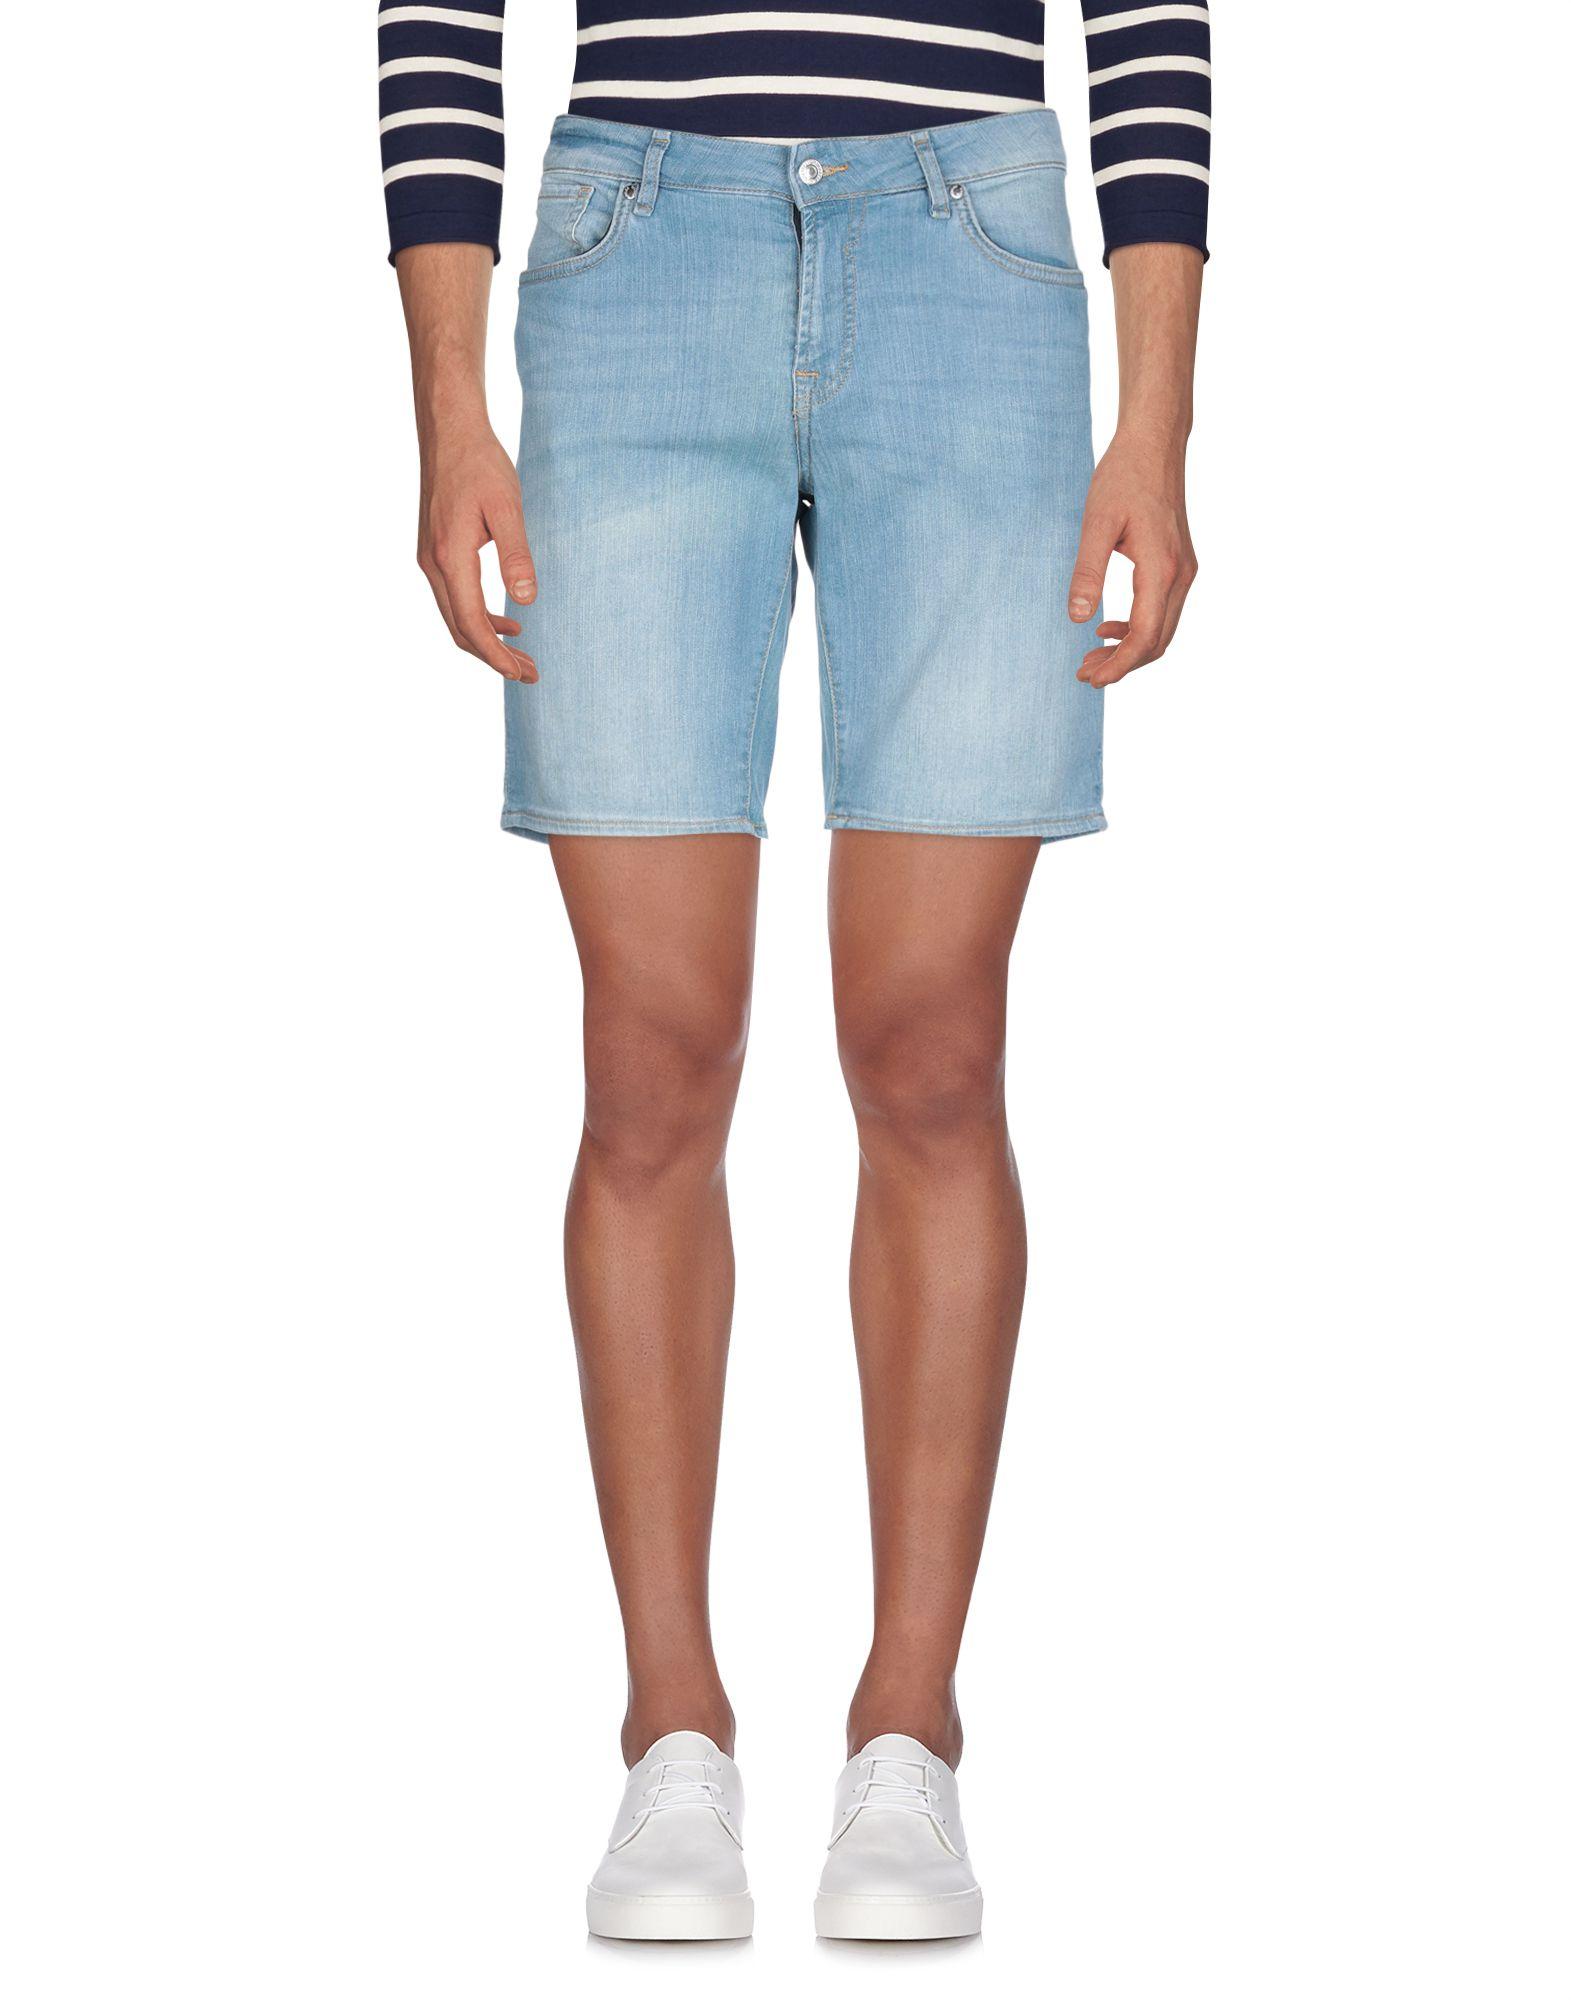 Guess Denim Shorts in Blue for Men - Lyst